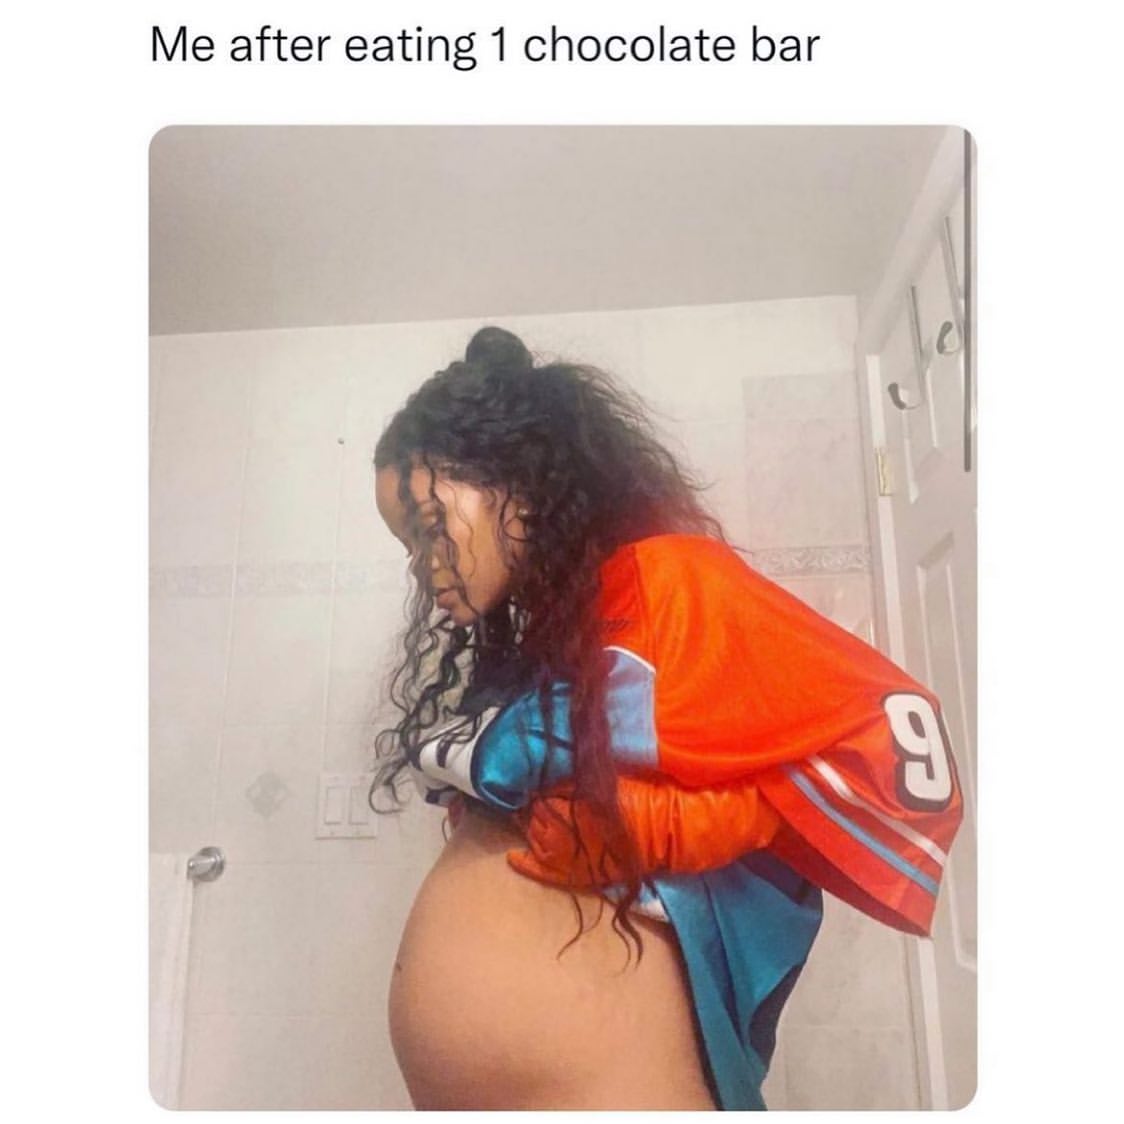 Me after eating 1 chocolate bar.